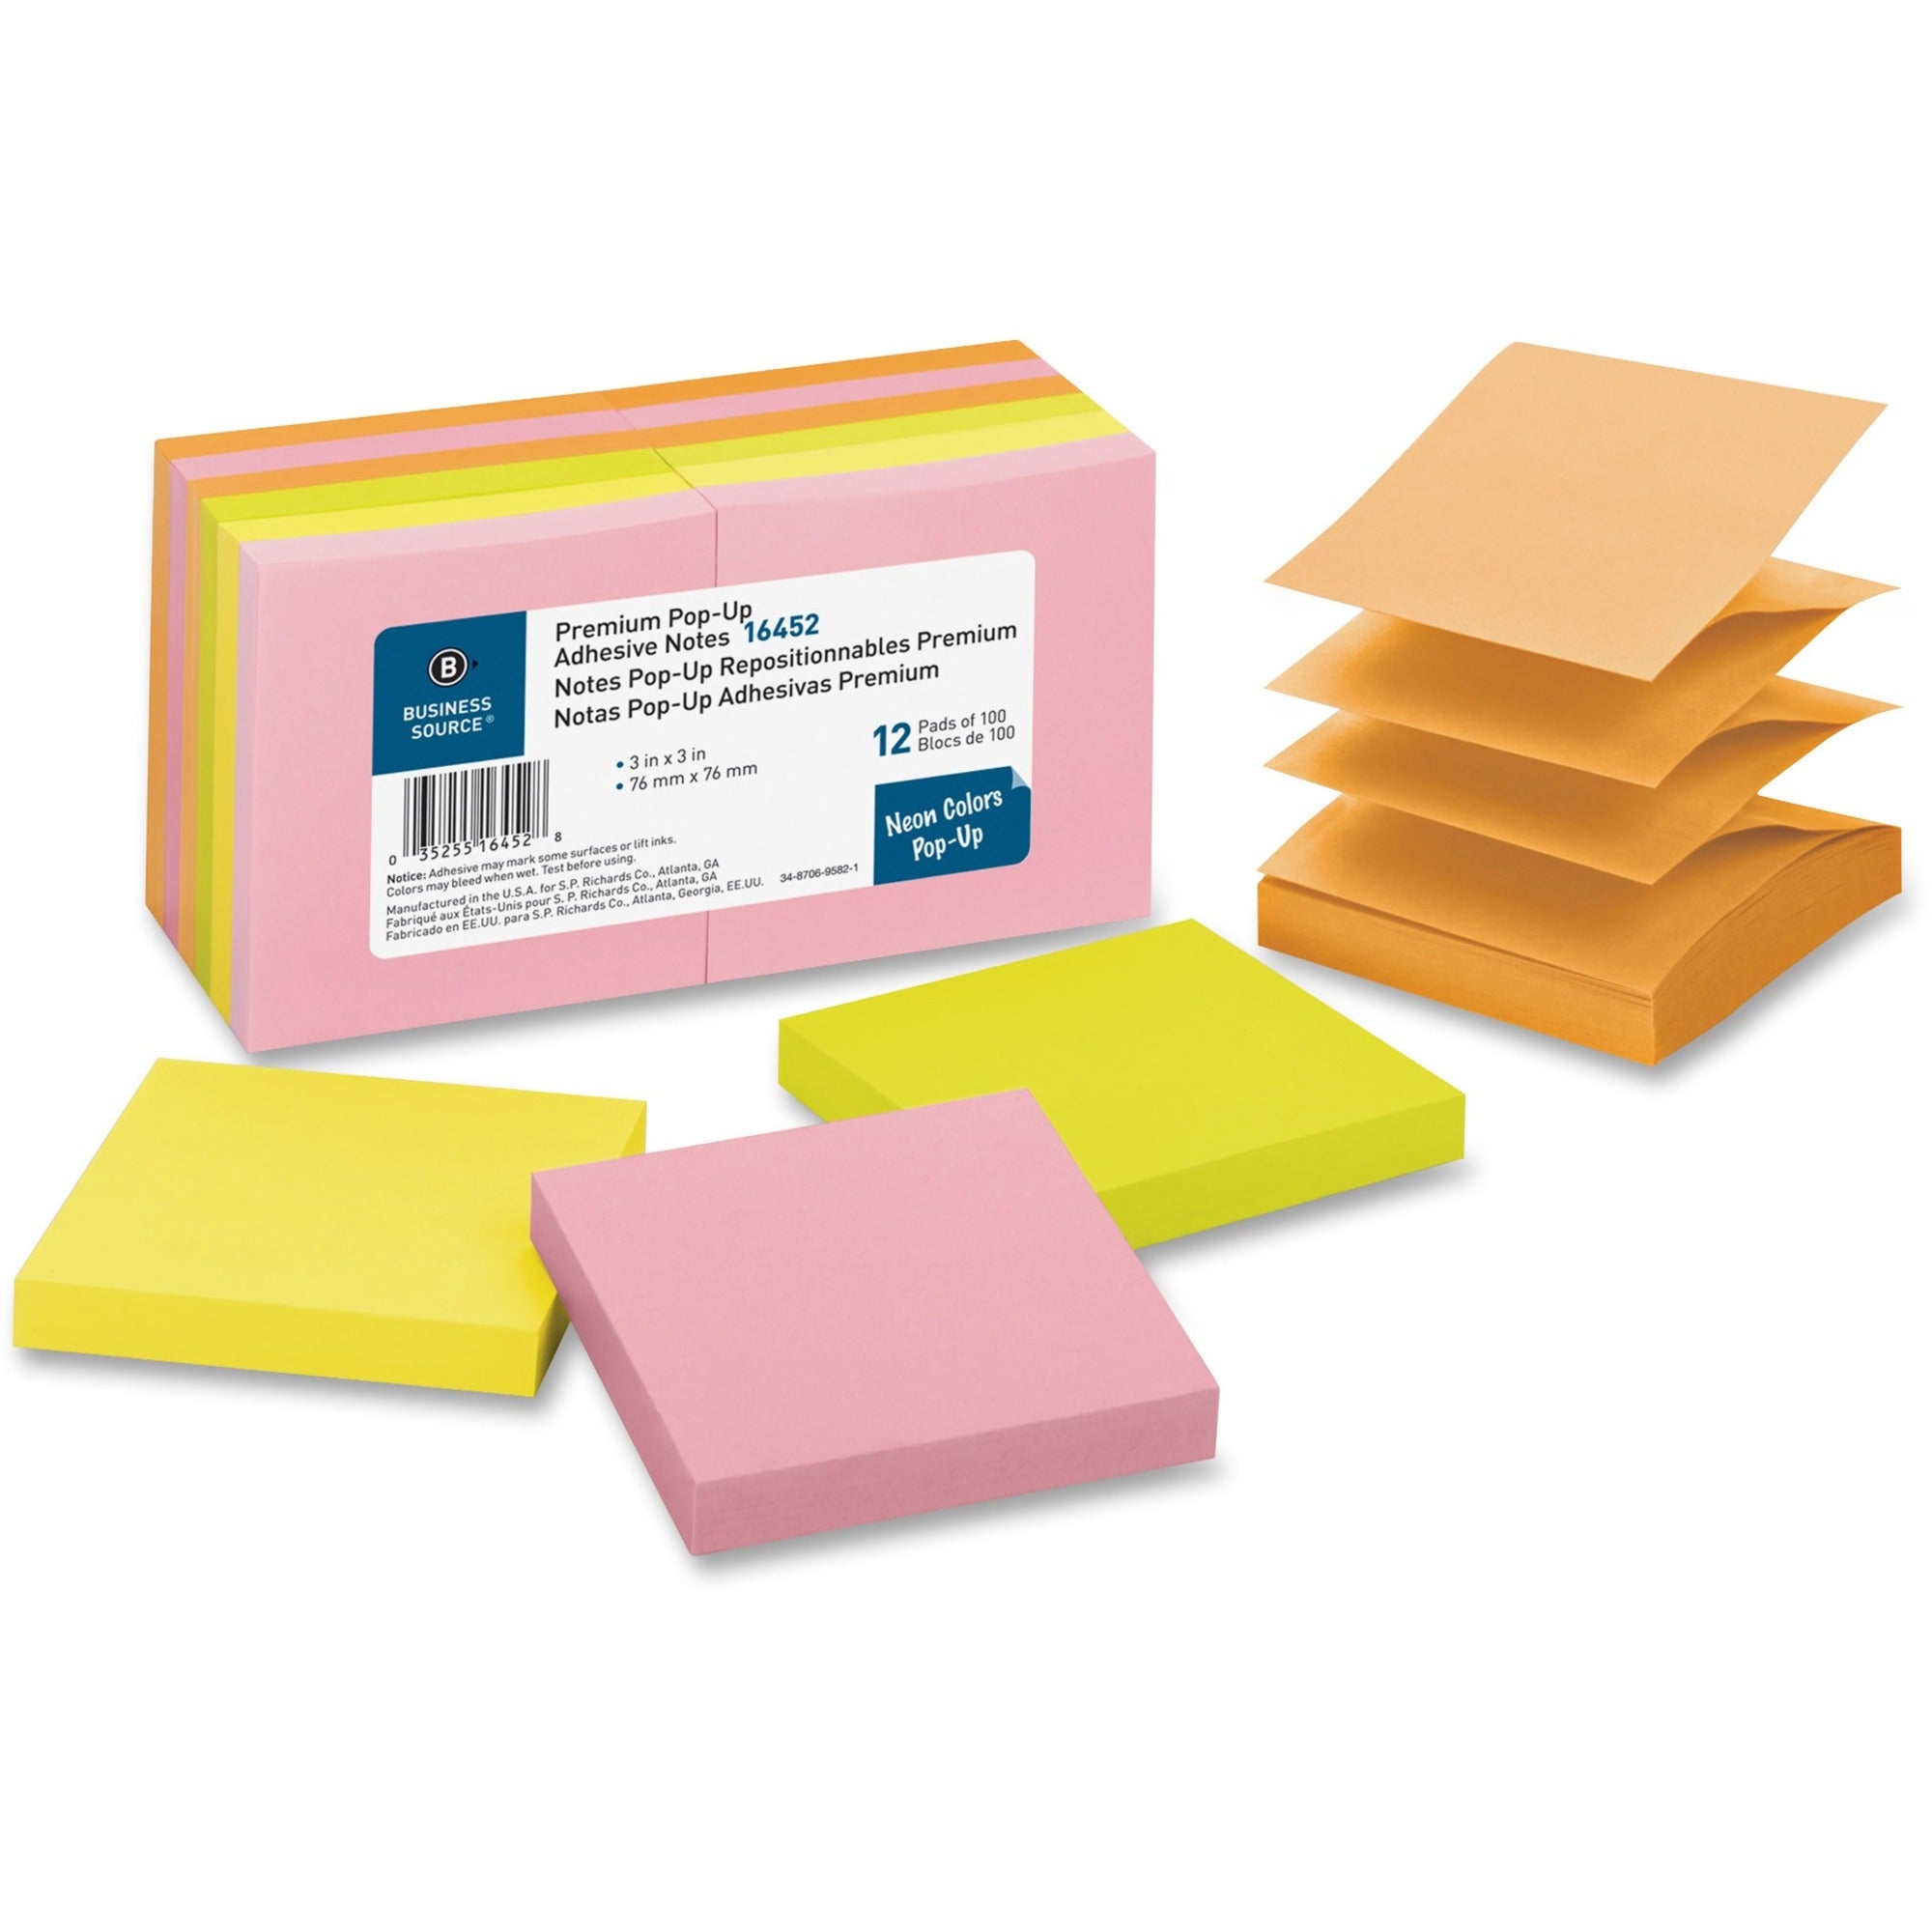 Business Source Reposition Pop-up Adhesive Notes - 3" x 3" - Square - Assorted Neon - Removable, Repositionable, Solvent-free Adhesive - 12 / Pack - 